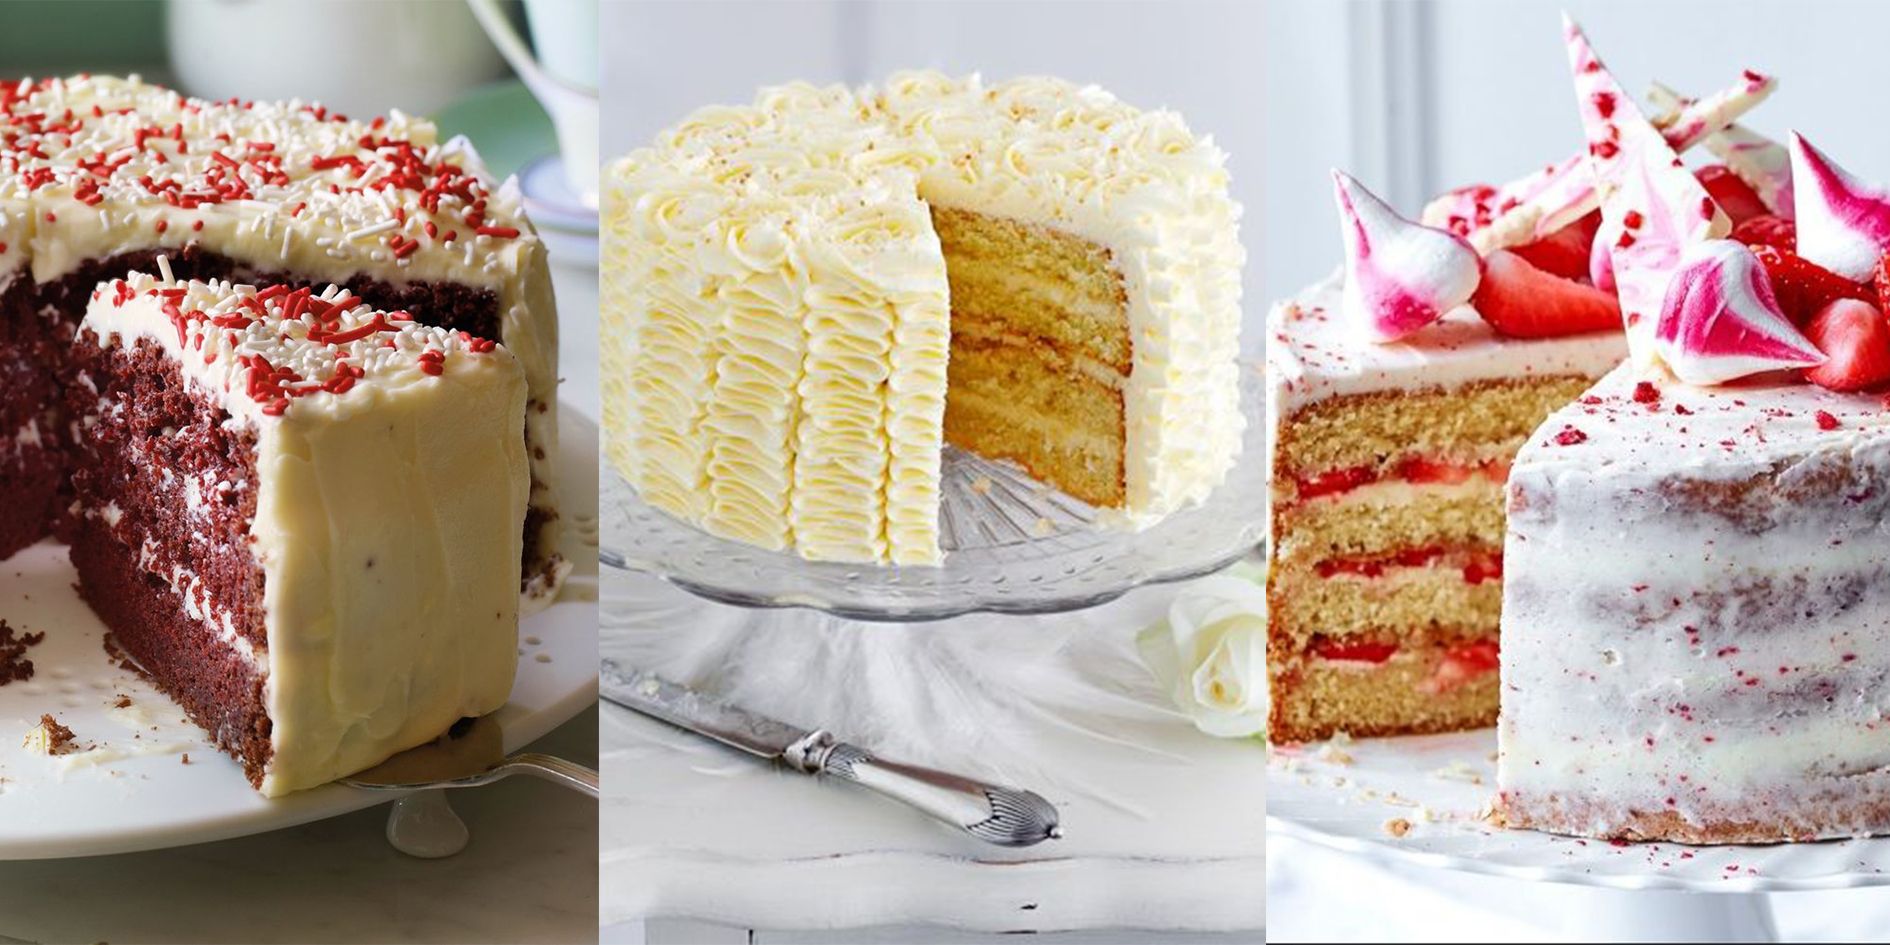 40+ Best Cake Recipes - Rich And Delish